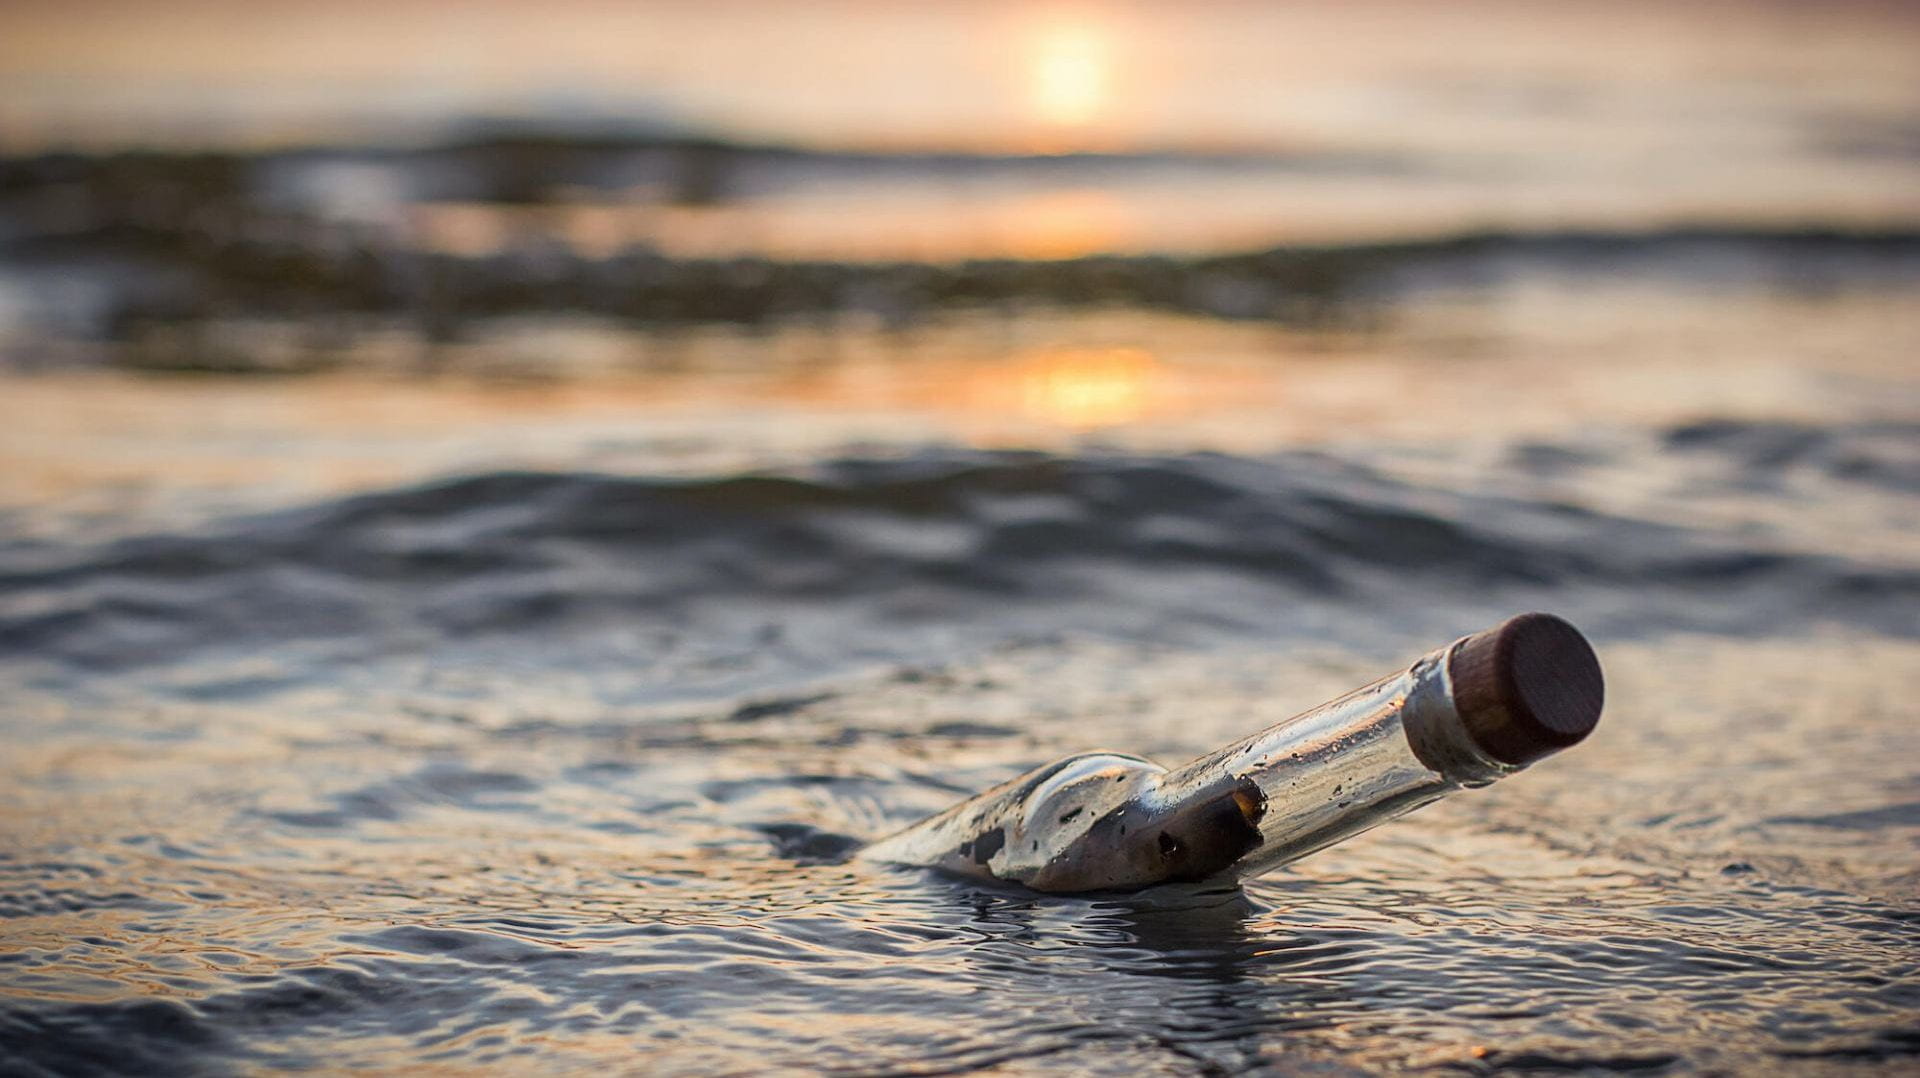 Message in a bottle in the water